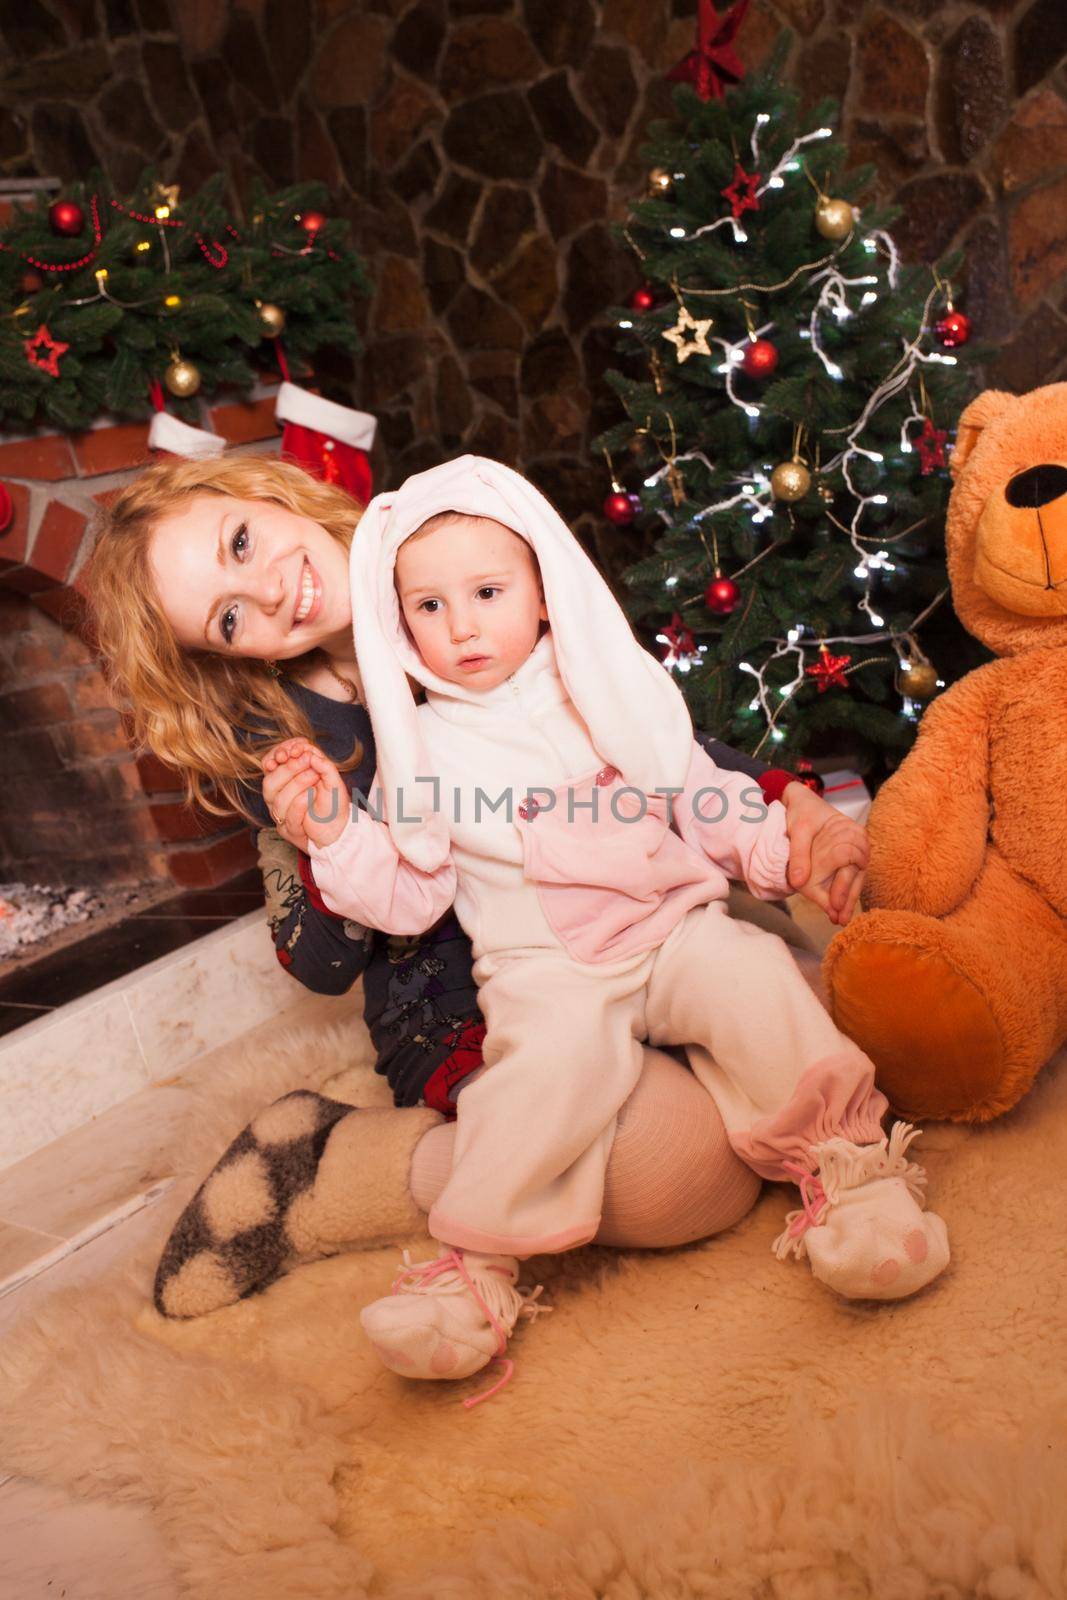 Mother with son in a rabbit costume. New year holiday decorations